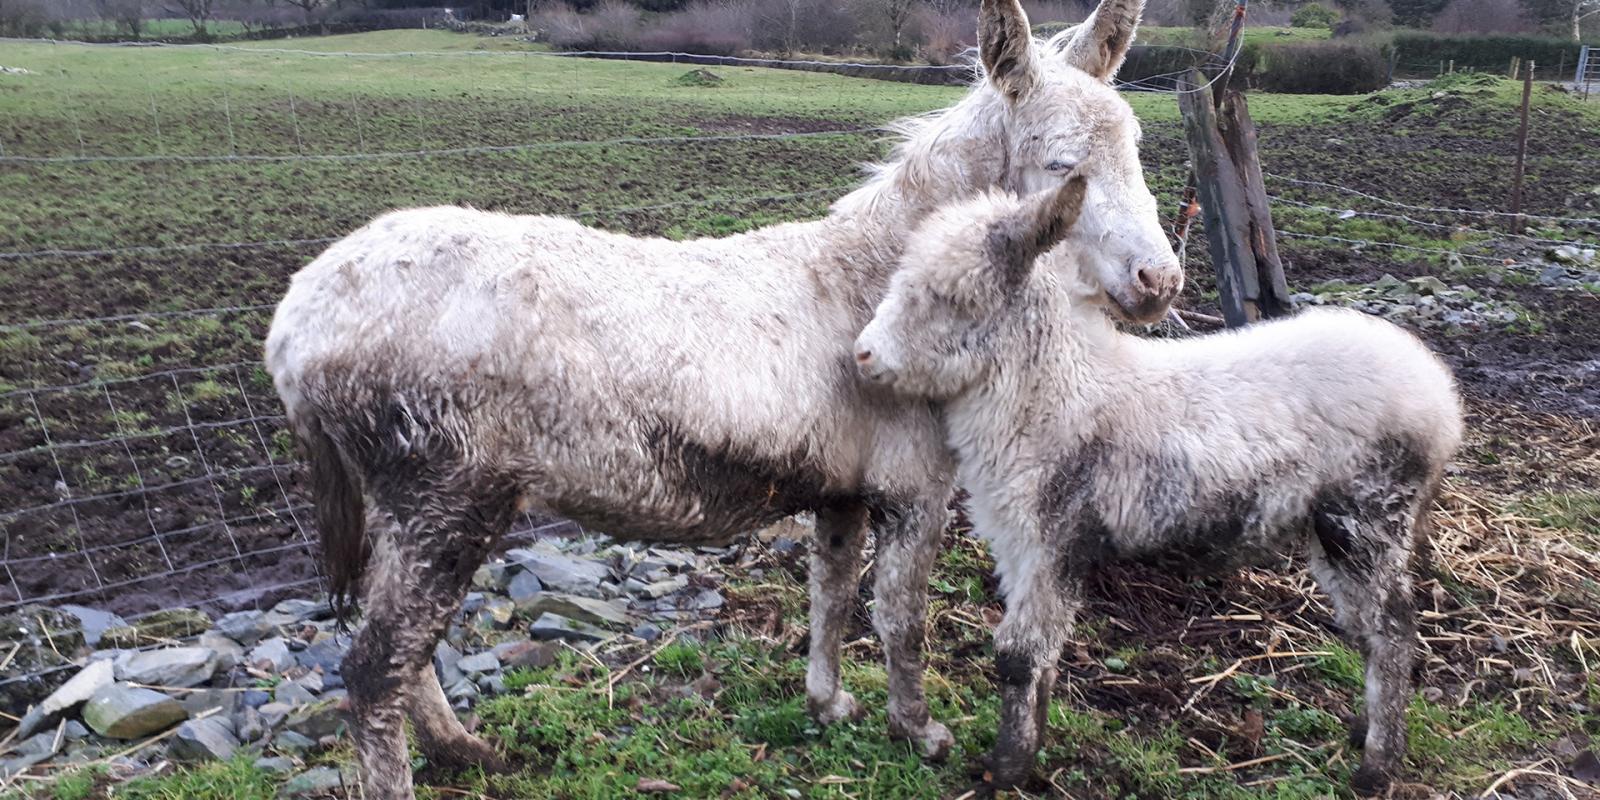 Snowdrop and his mother Snowflake were rescued from a wet field